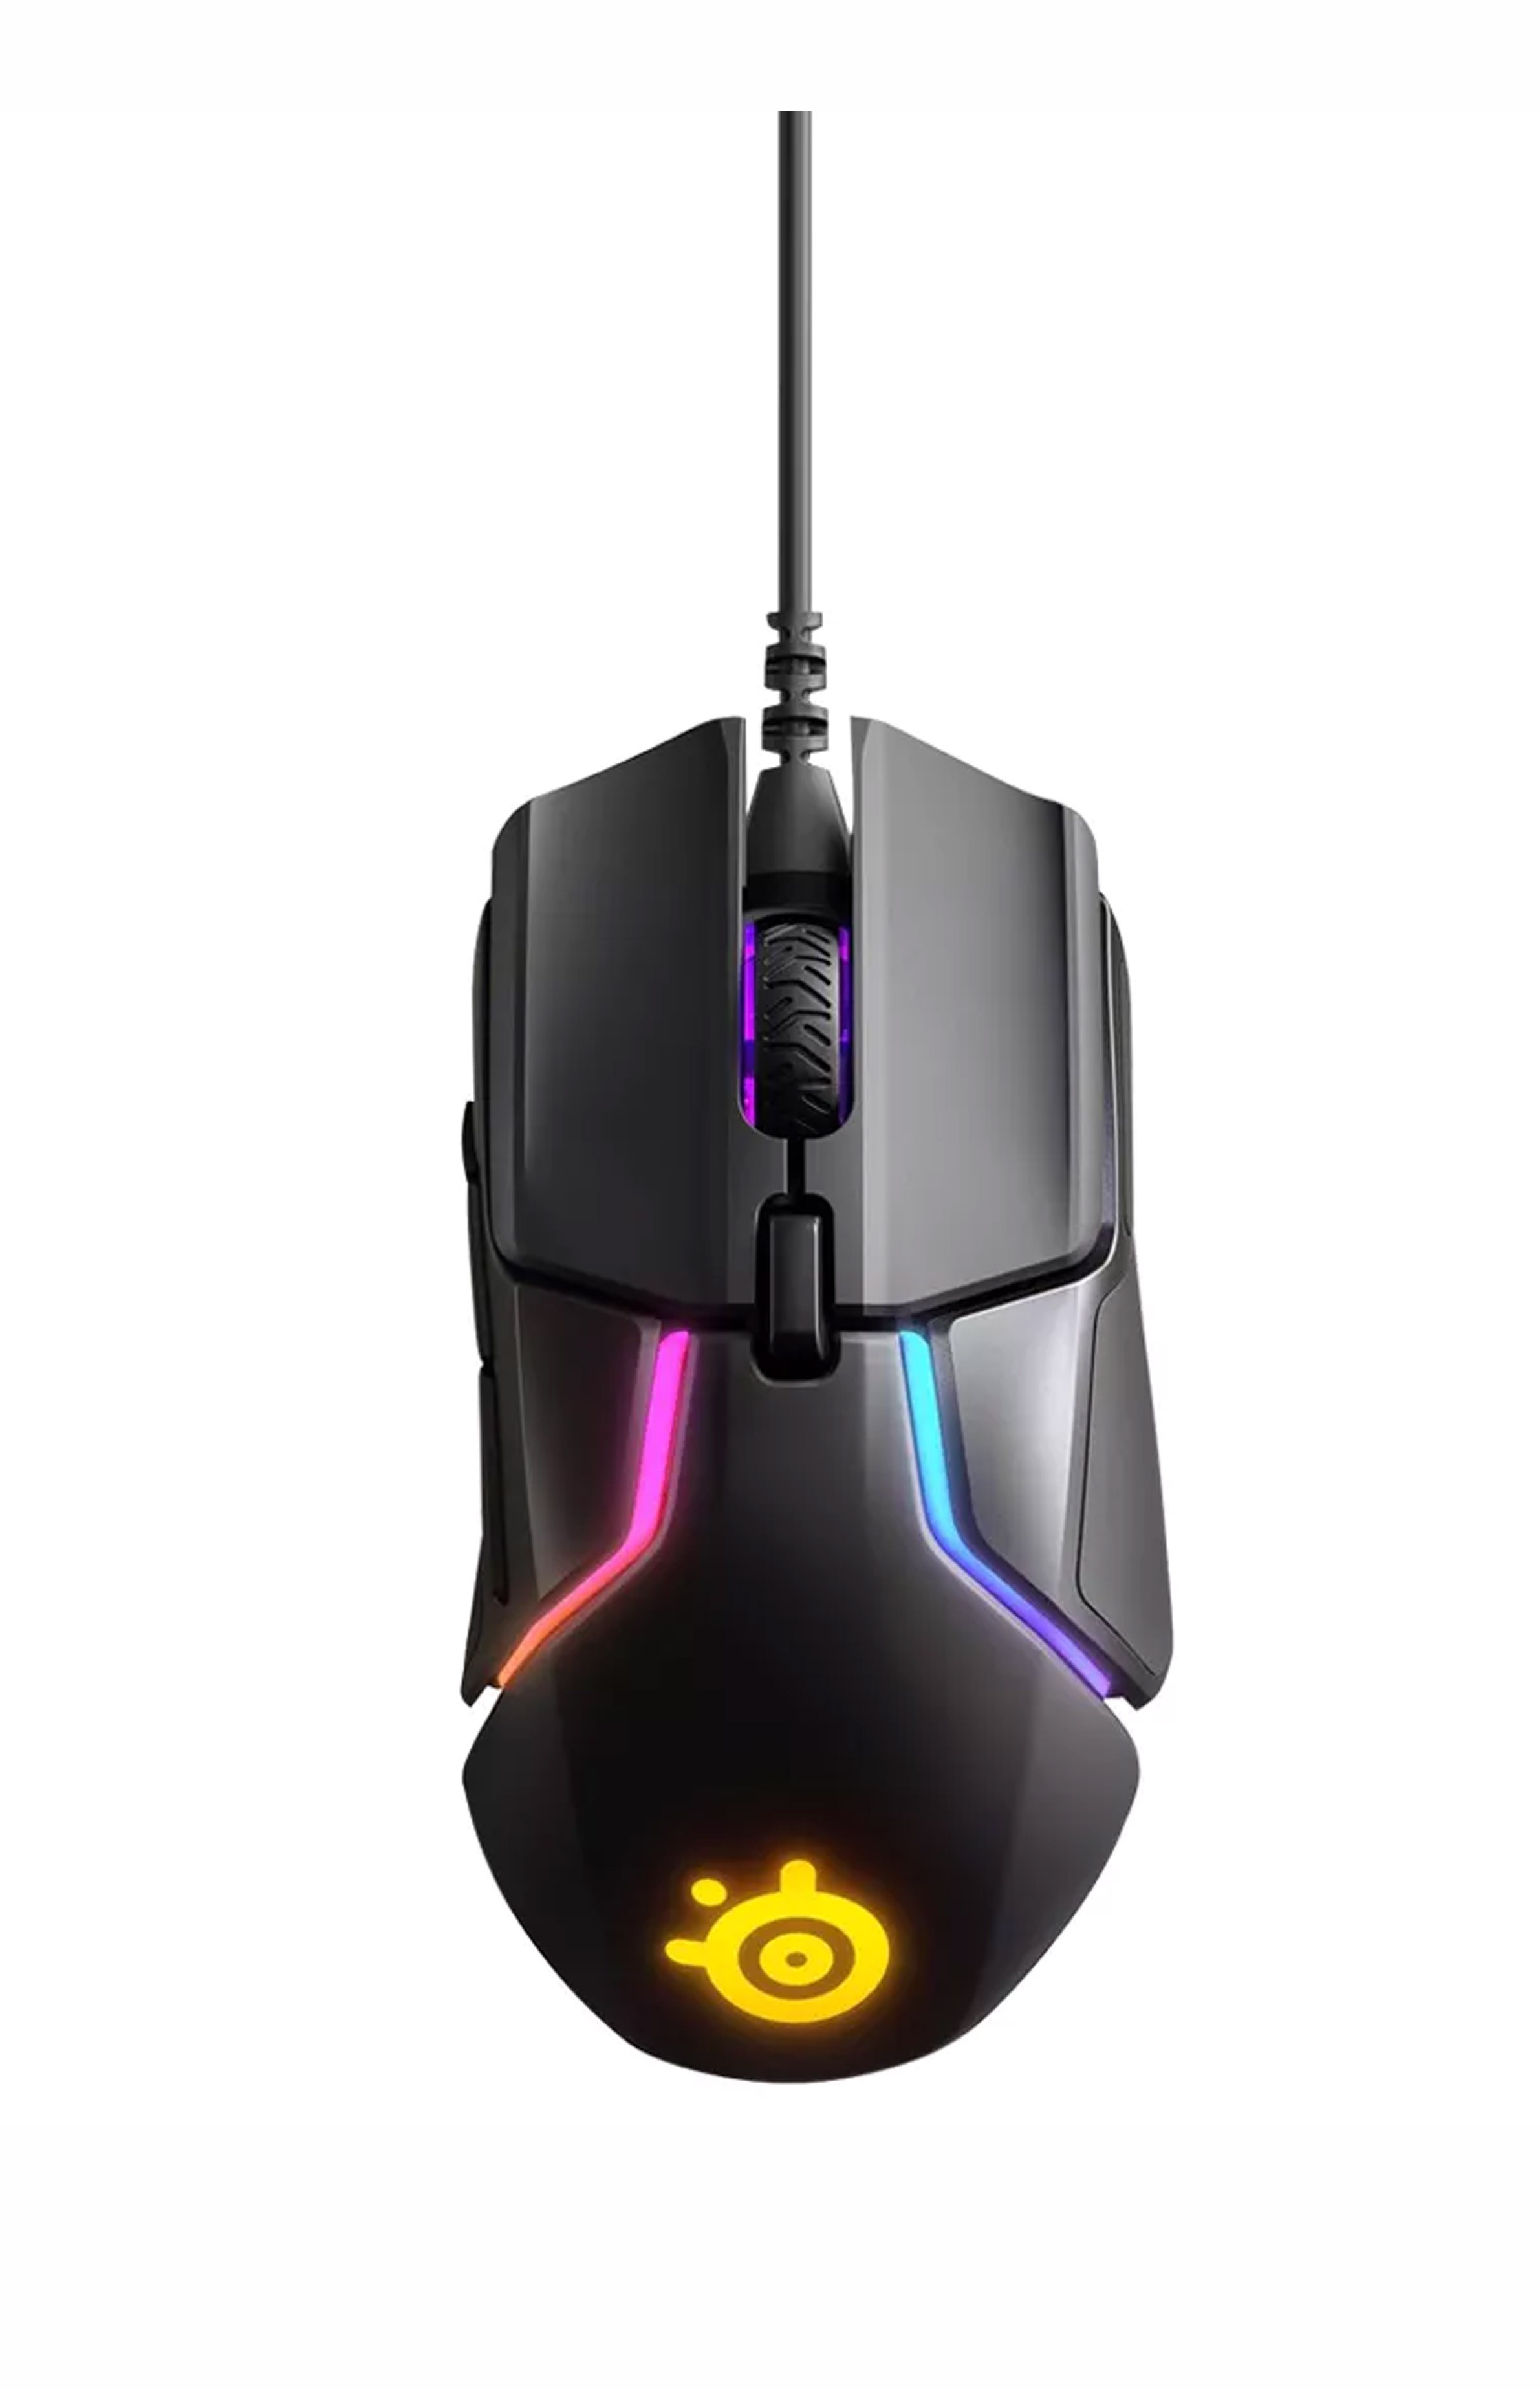 Steelseries RIVAL 600 gaming mouse